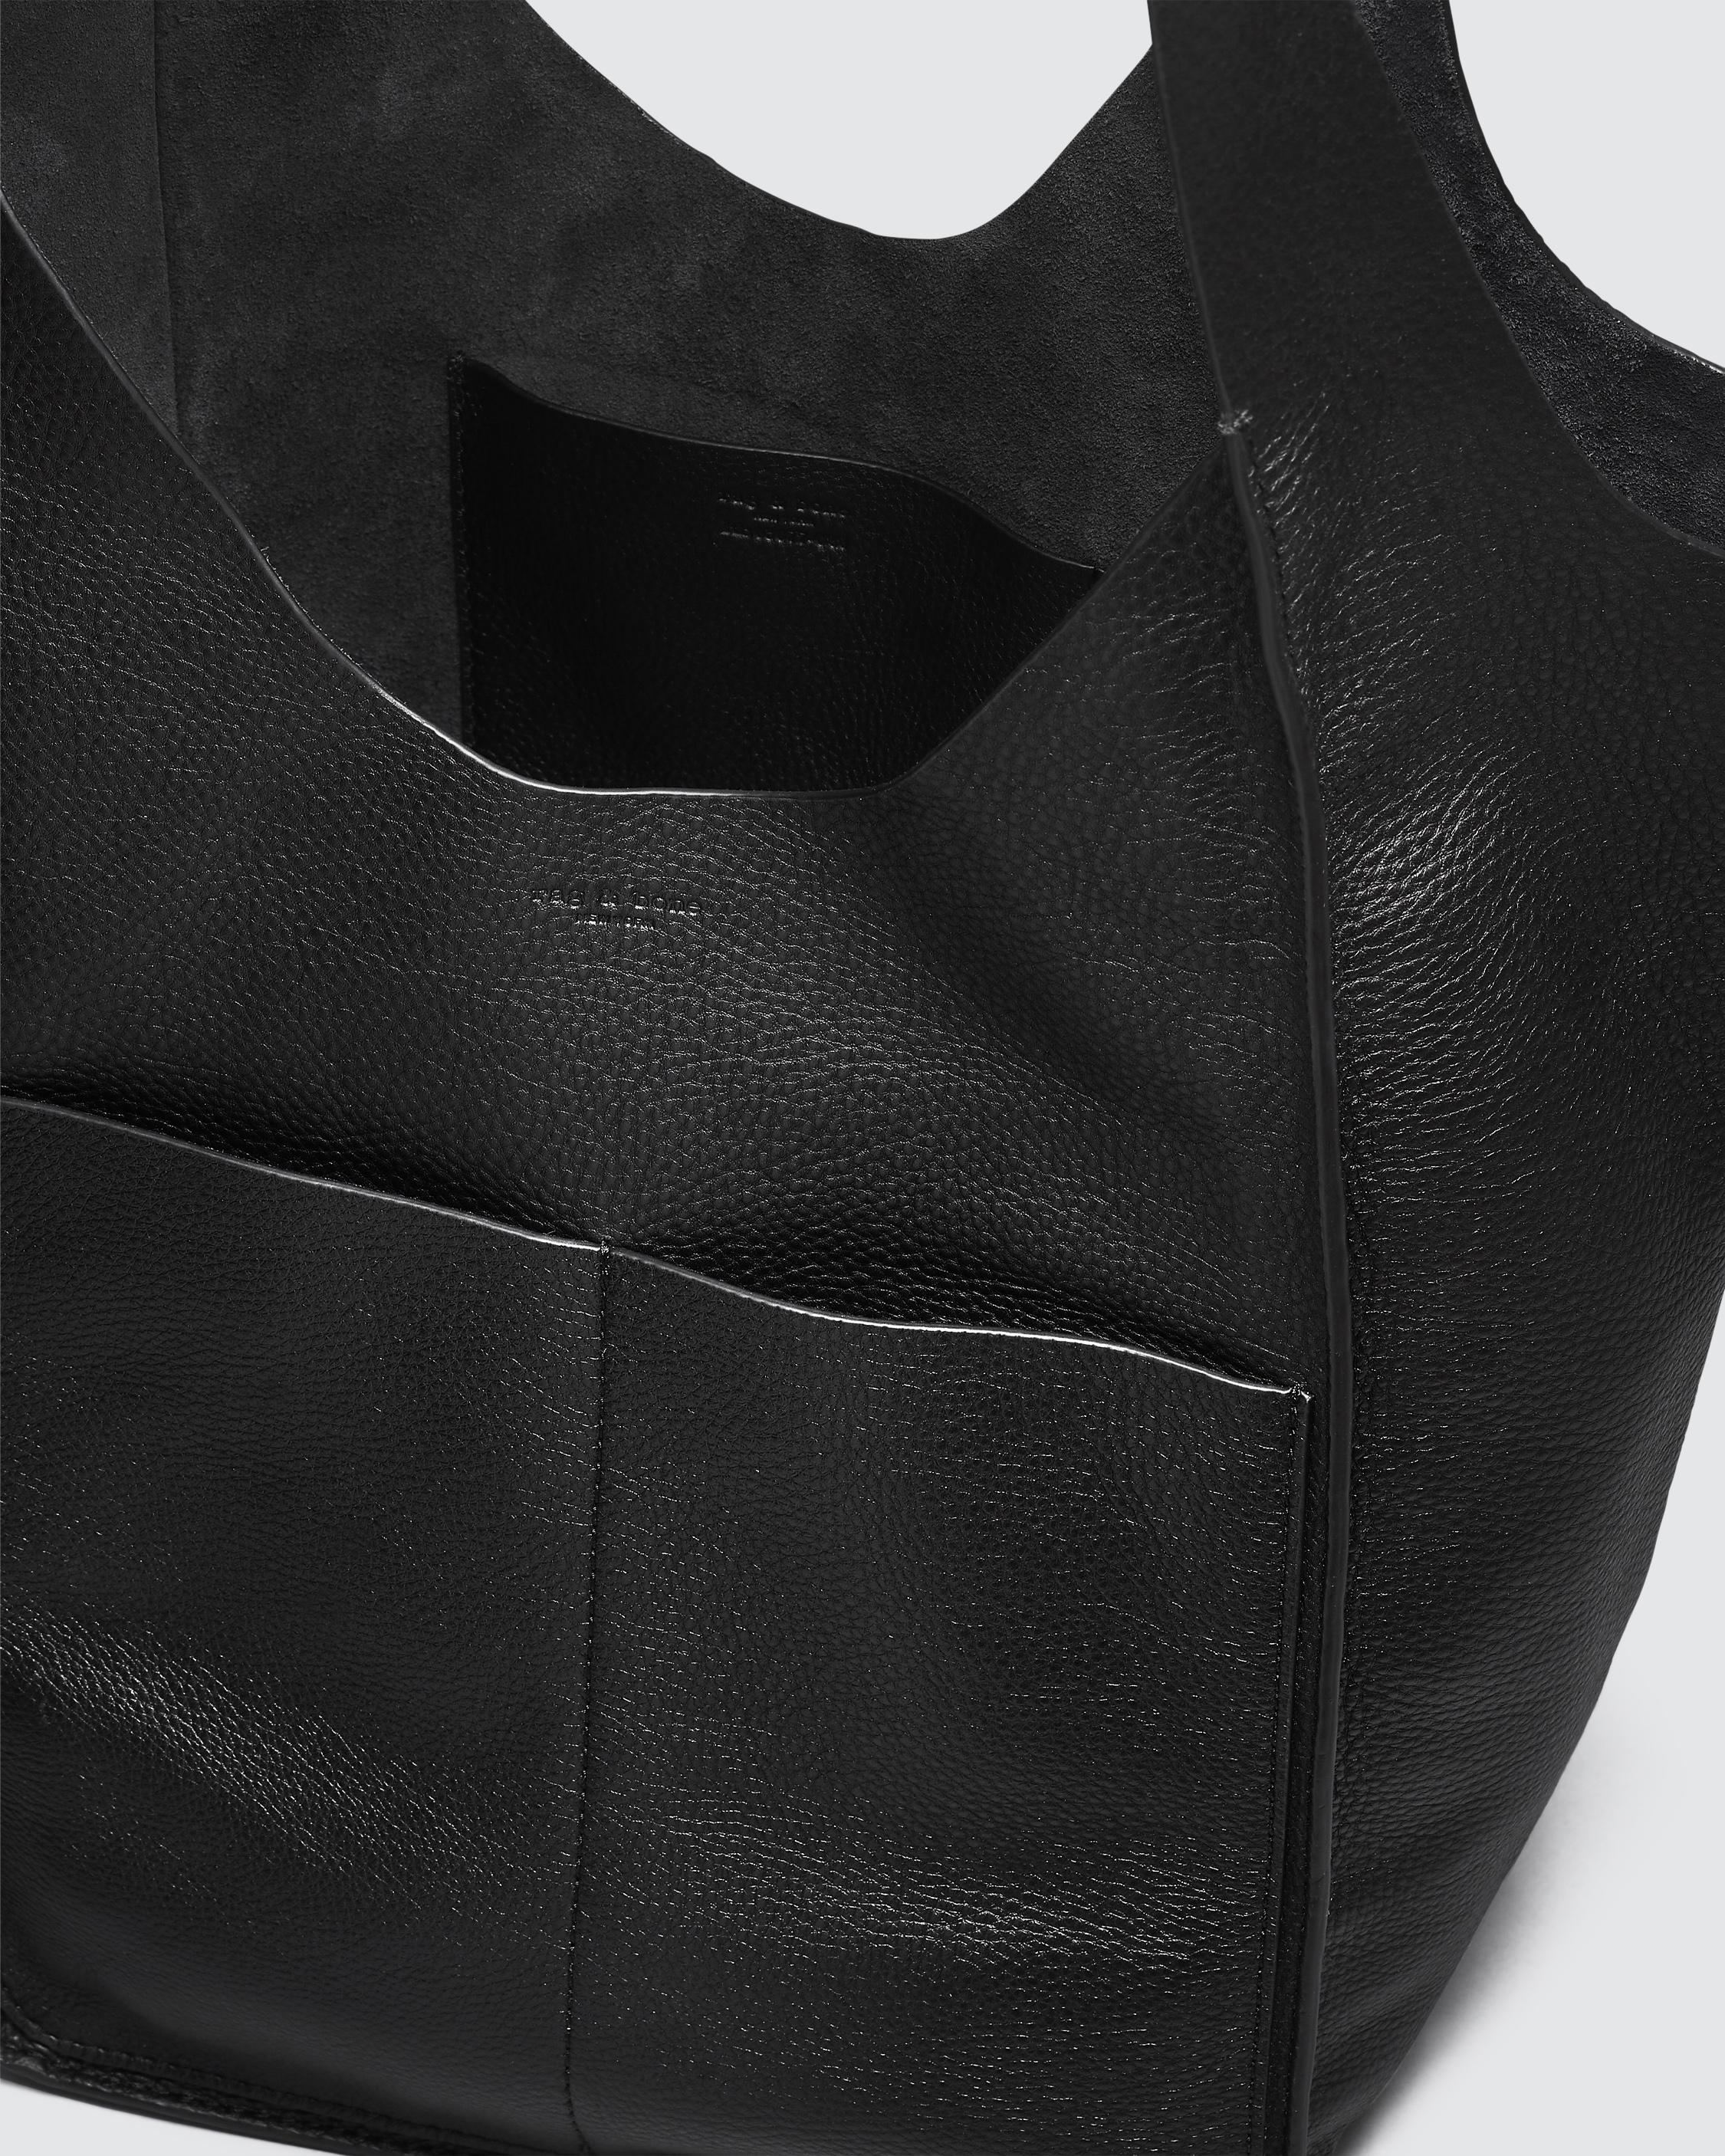 Buy the Logan Tote - Leather